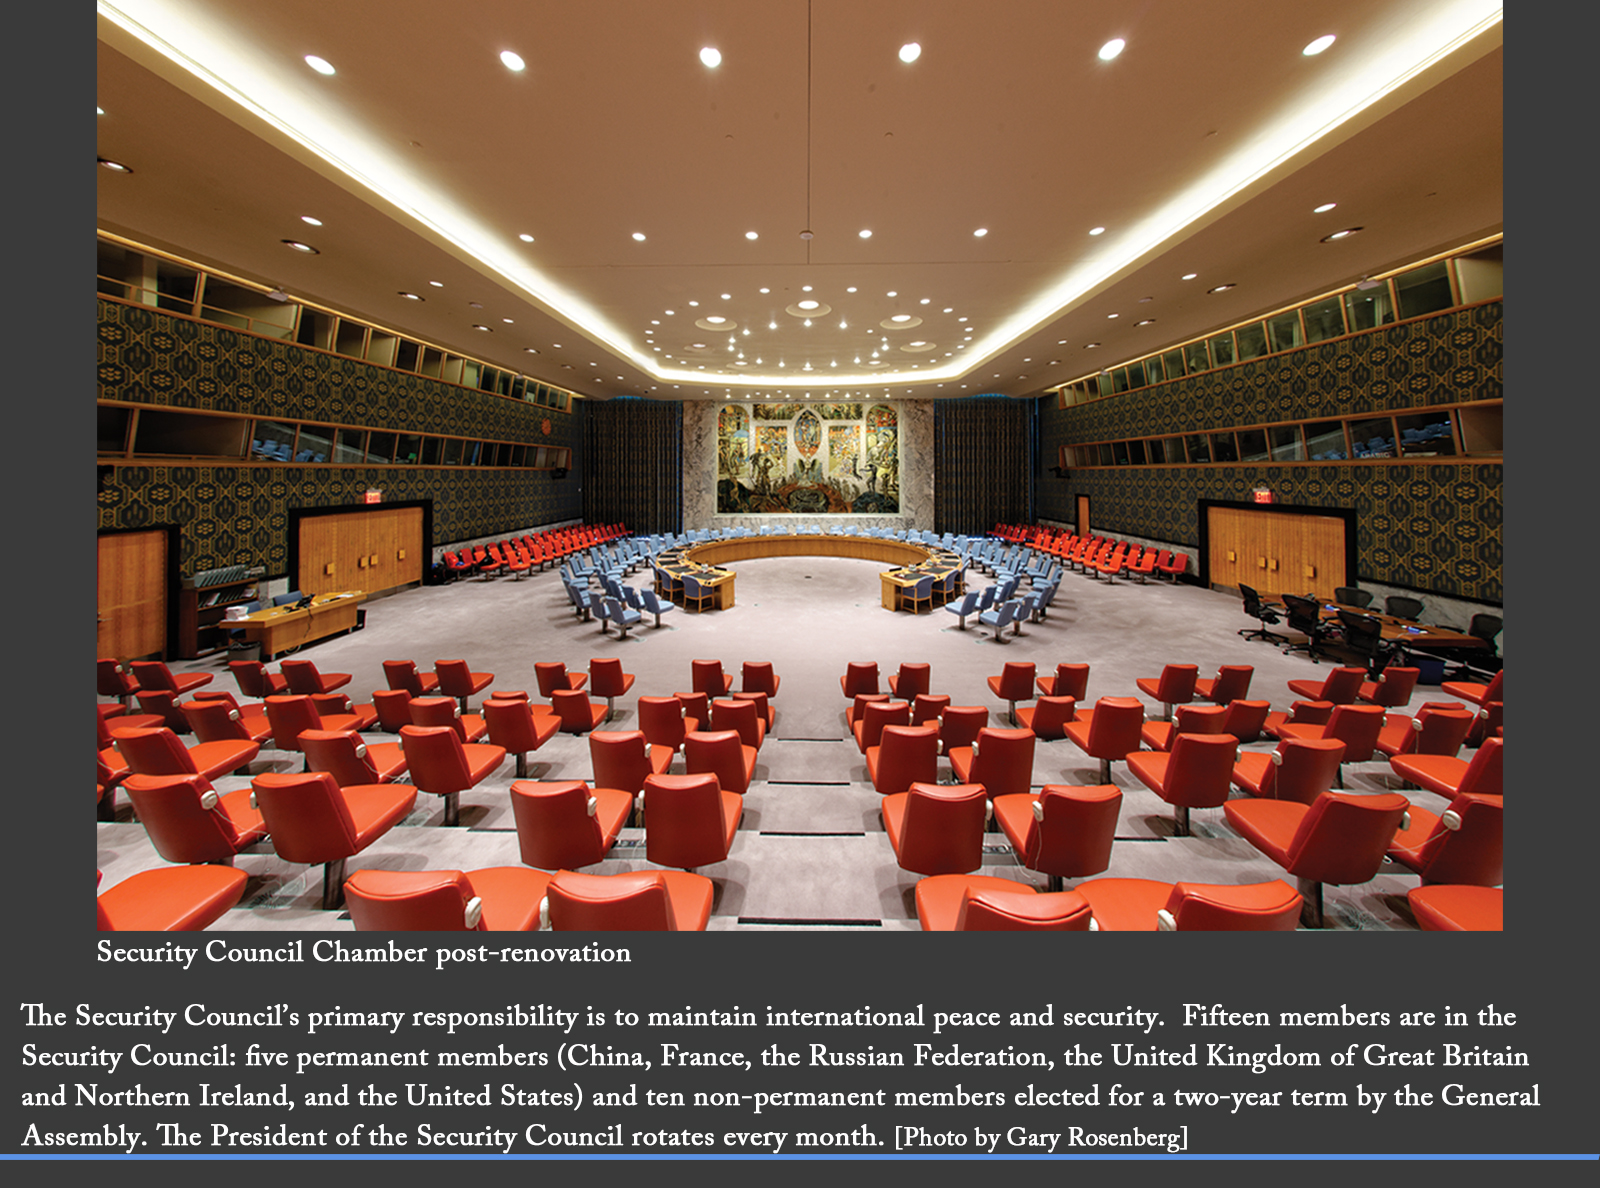 Security Council Chamber post-renovation